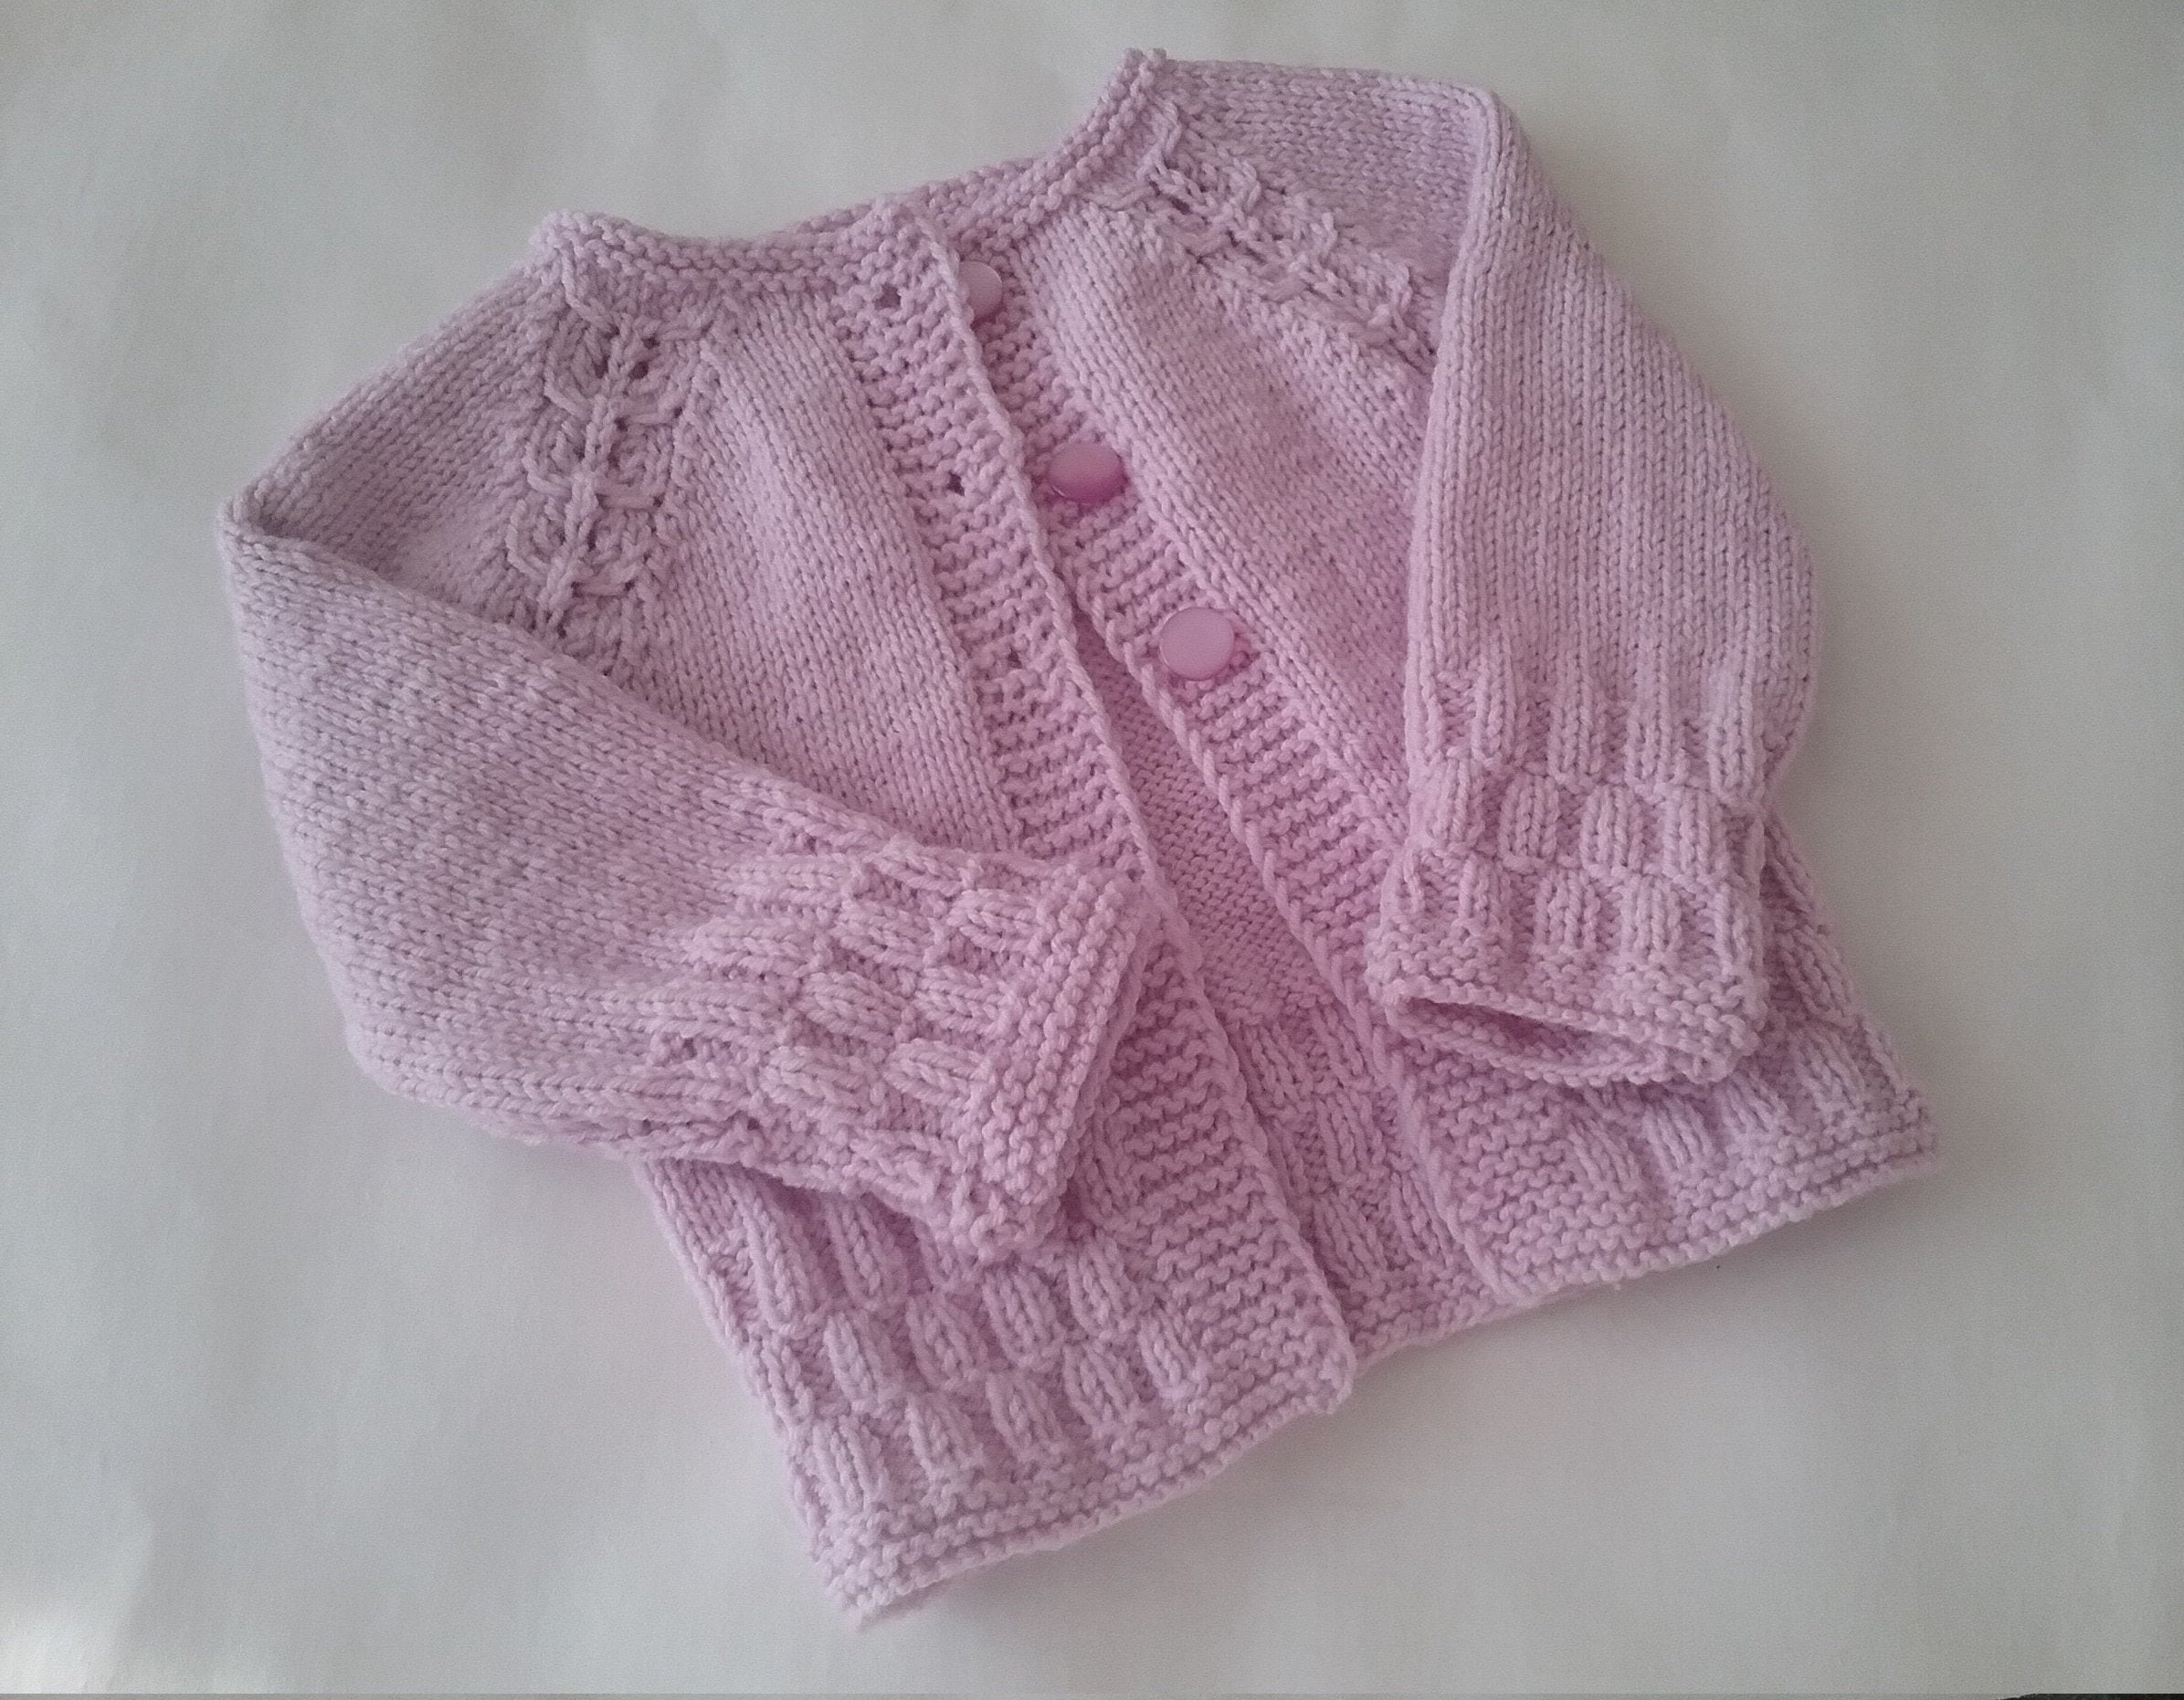 Baby girl cardigan knitting pattern 6 months to 18 months | Etsy